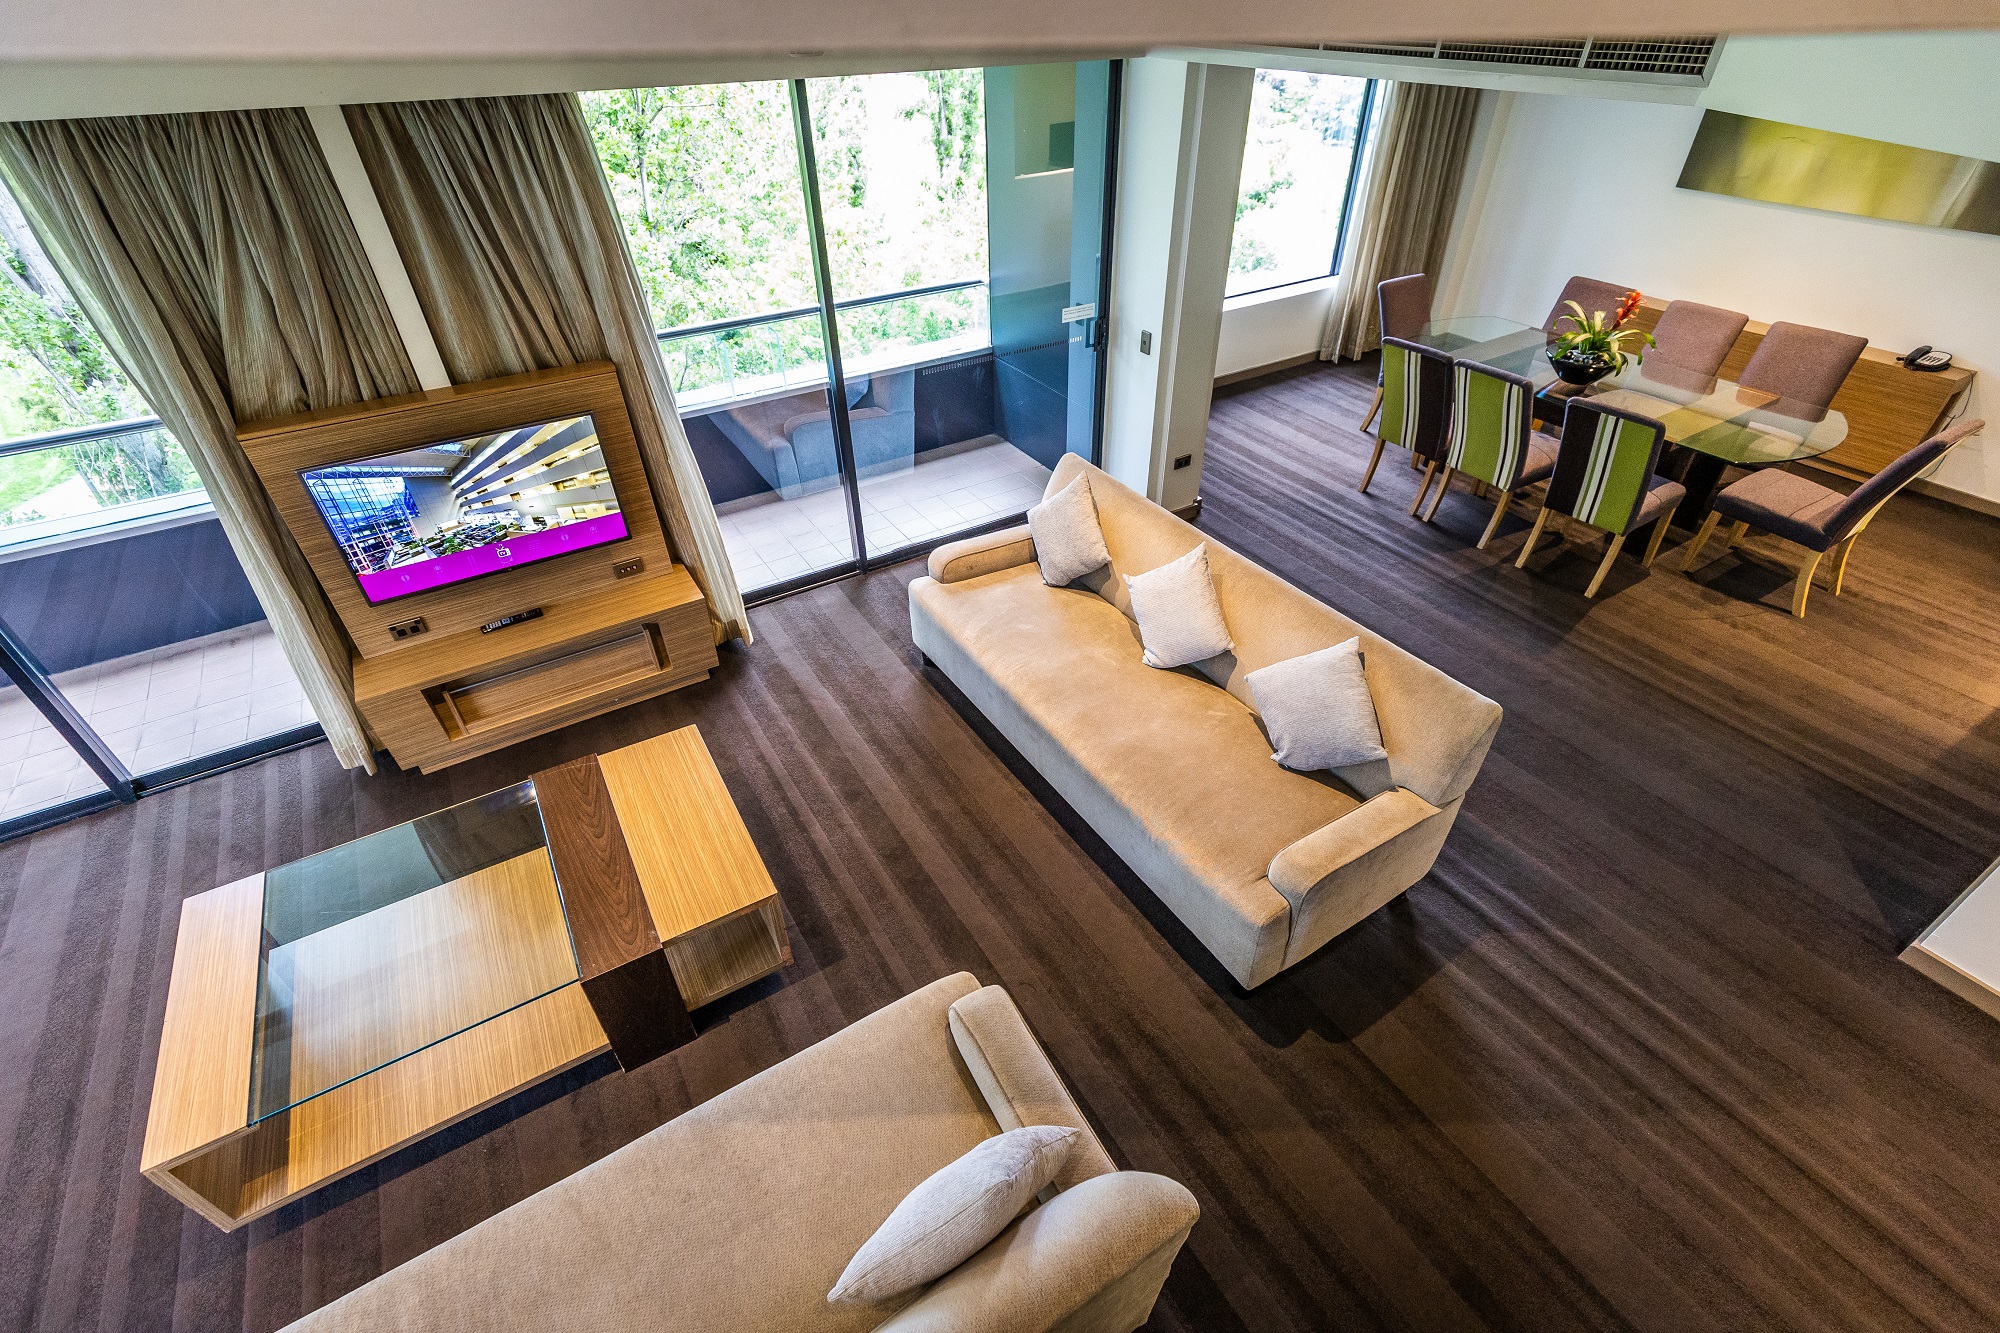 Presidential Suite living space at Crowne Plaza Canberra